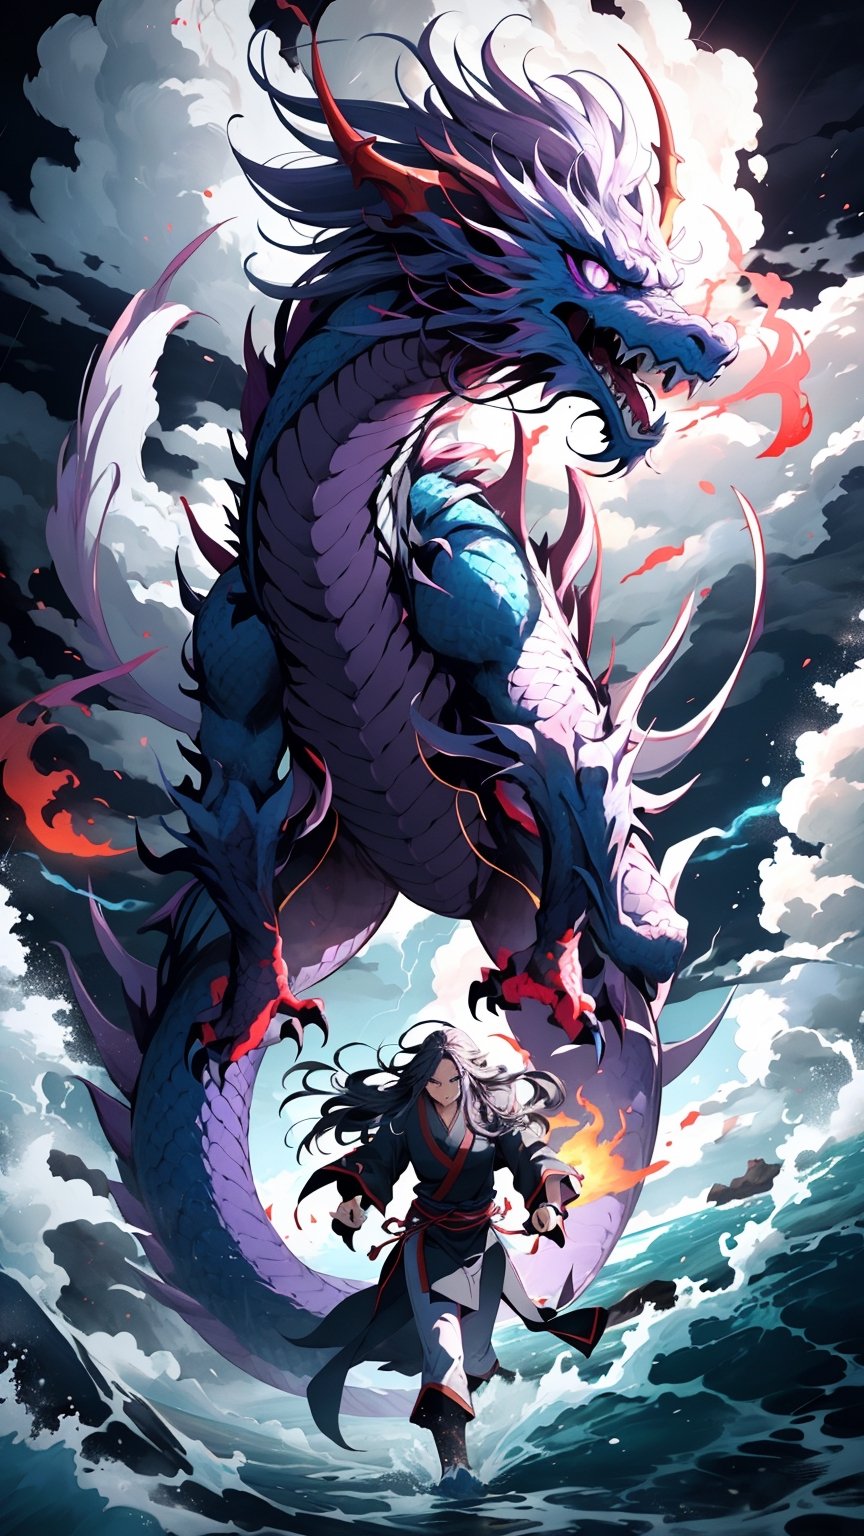 Hyperrealistic art BJ_Sacred_beast, flame ninetails Chinese dragon, A Valkyrie from Chinese martial arts, standing on the head of a dragon,purple eyes,flying, angry expression,full body,run,suspension,outdoors,night,fire,storm_sky,ocean,cloudy_sky,cinematic lighting,strong contrast,high level of detail,Best quality,masterpiece,, . Extremely high-resolution details, photographic, realism pushed to extreme, fine texture, incredibly lifelike, leggendary